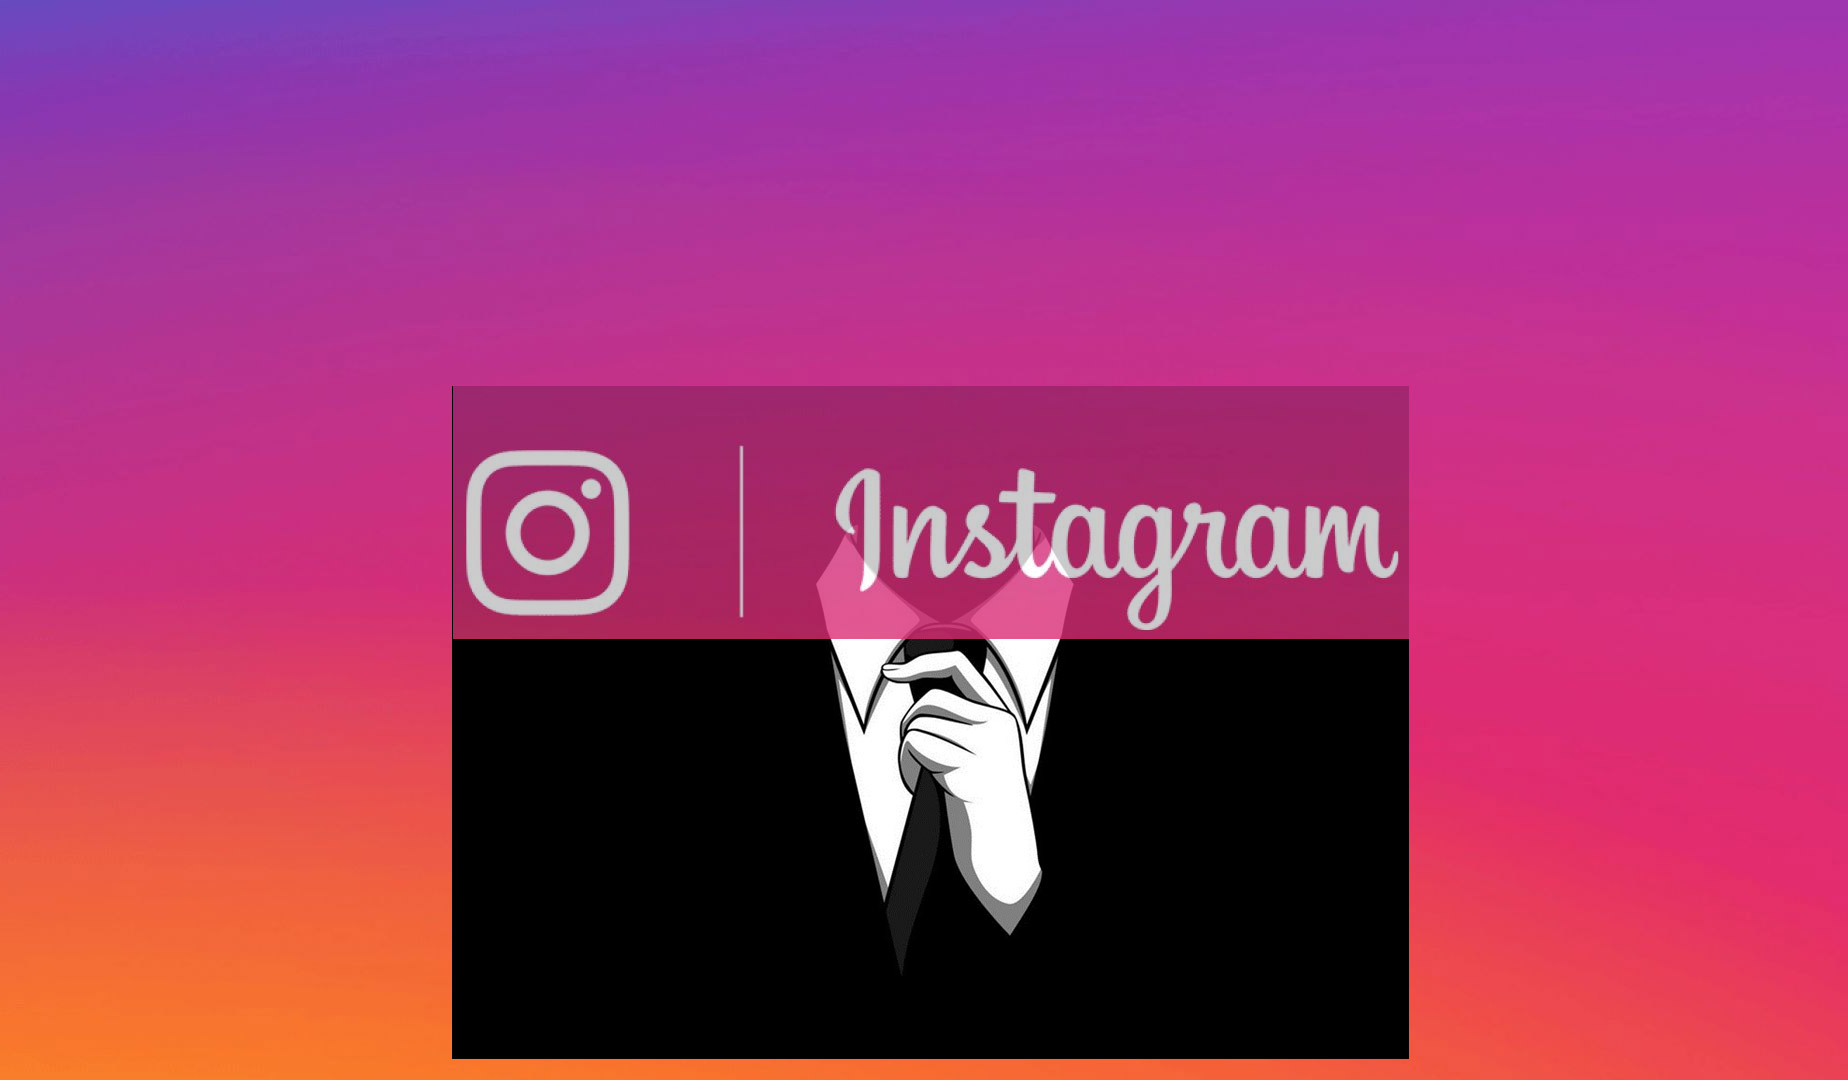 How I Could Have Hacked Any Instagram Account - The Zero Hack thumbnail